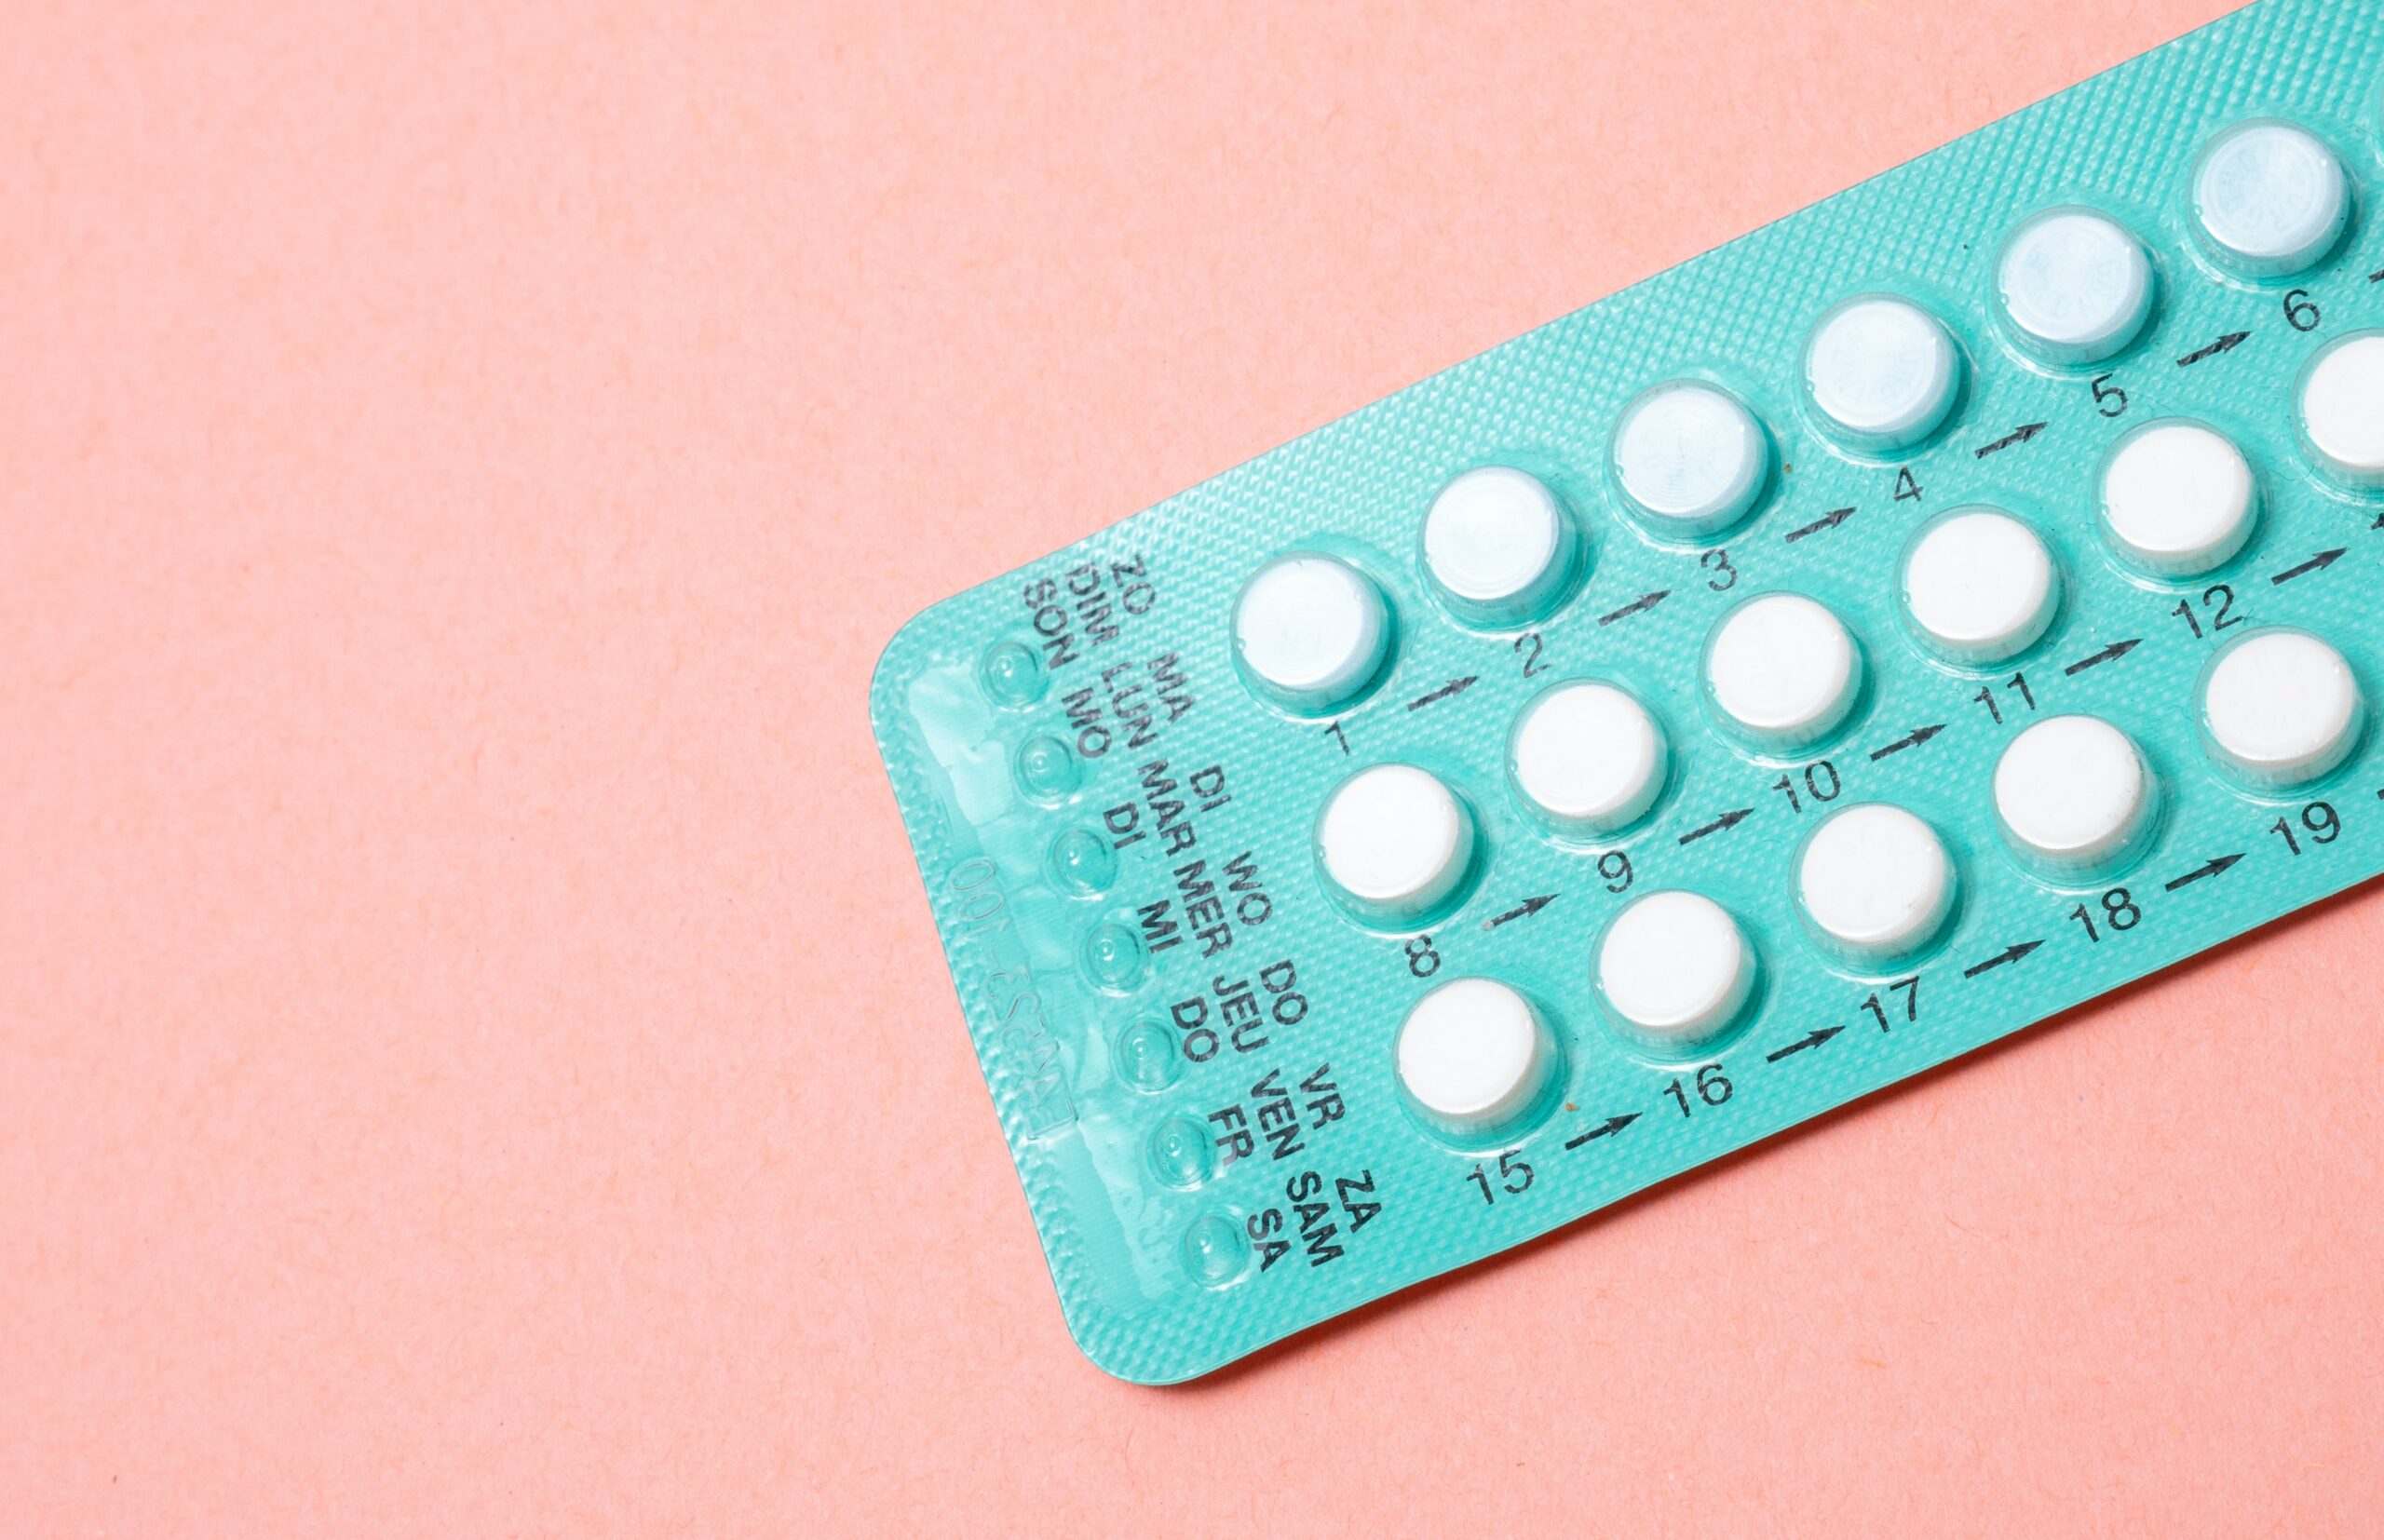 a blister pack of oral contraceptive against a pink background